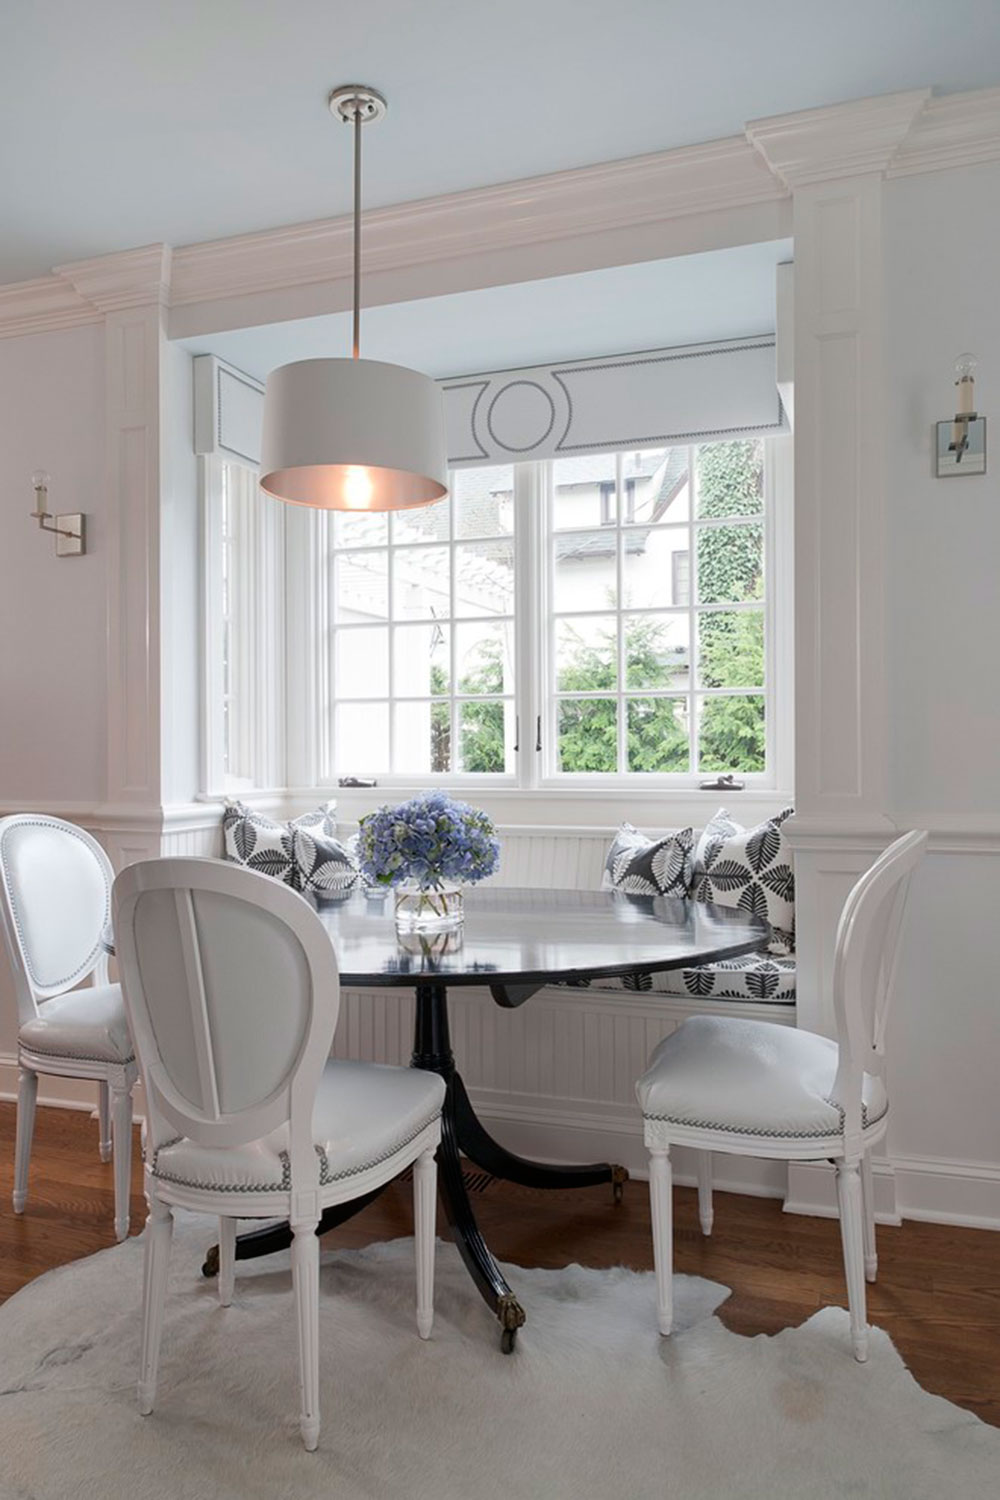 Breakfast-Nook-Design-Ideas-for-Awesome-Mornings9 Breakfast Nook Design-Ideas for Awesome Mornings